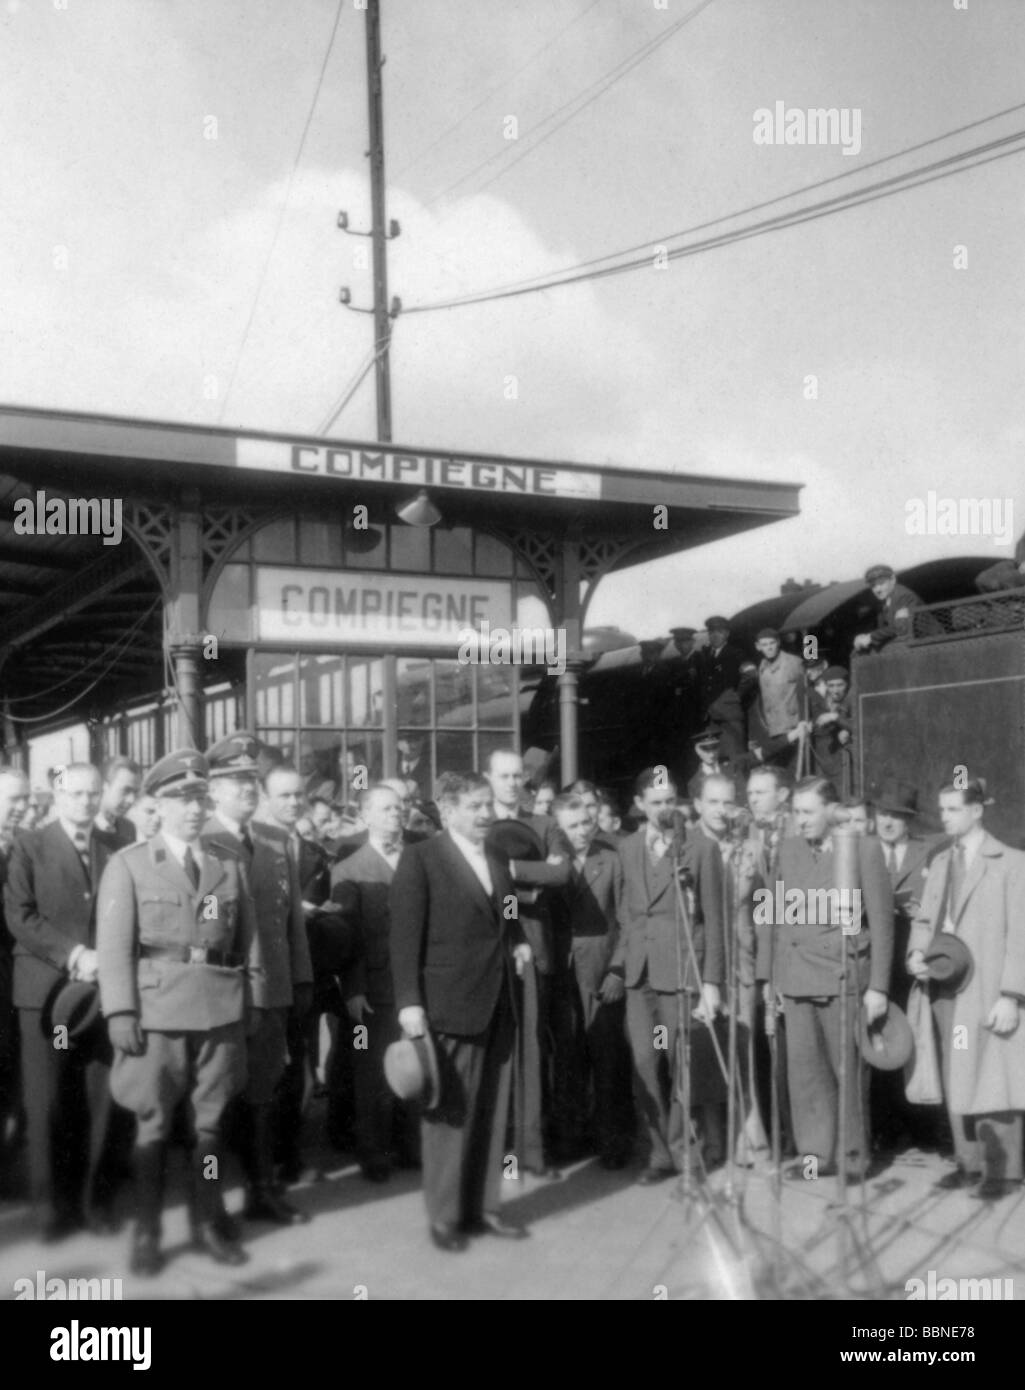 events, Second World War / WWII, France, politics, release of French prisoners of war, in exchange for voluntary French workers, arrival in Compiegne, 11.8.1942, Prime Minister Pierre Laval giving speech, Stock Photo